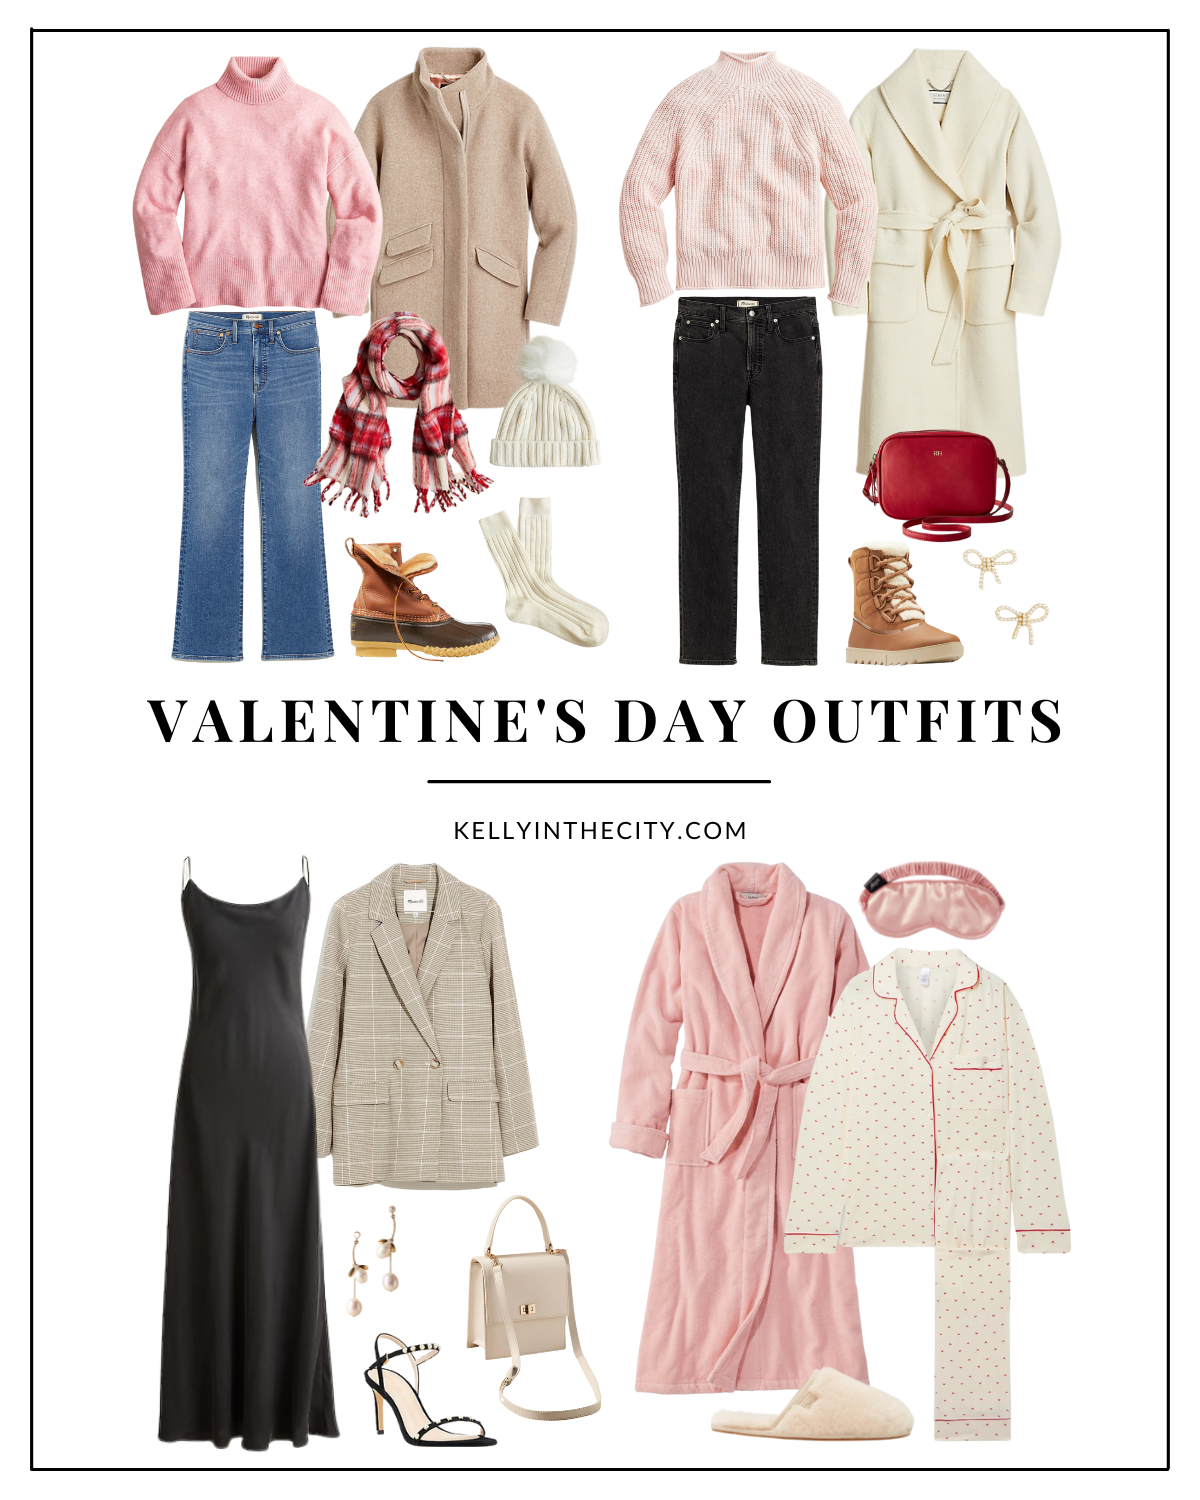 Valentines Outfits!